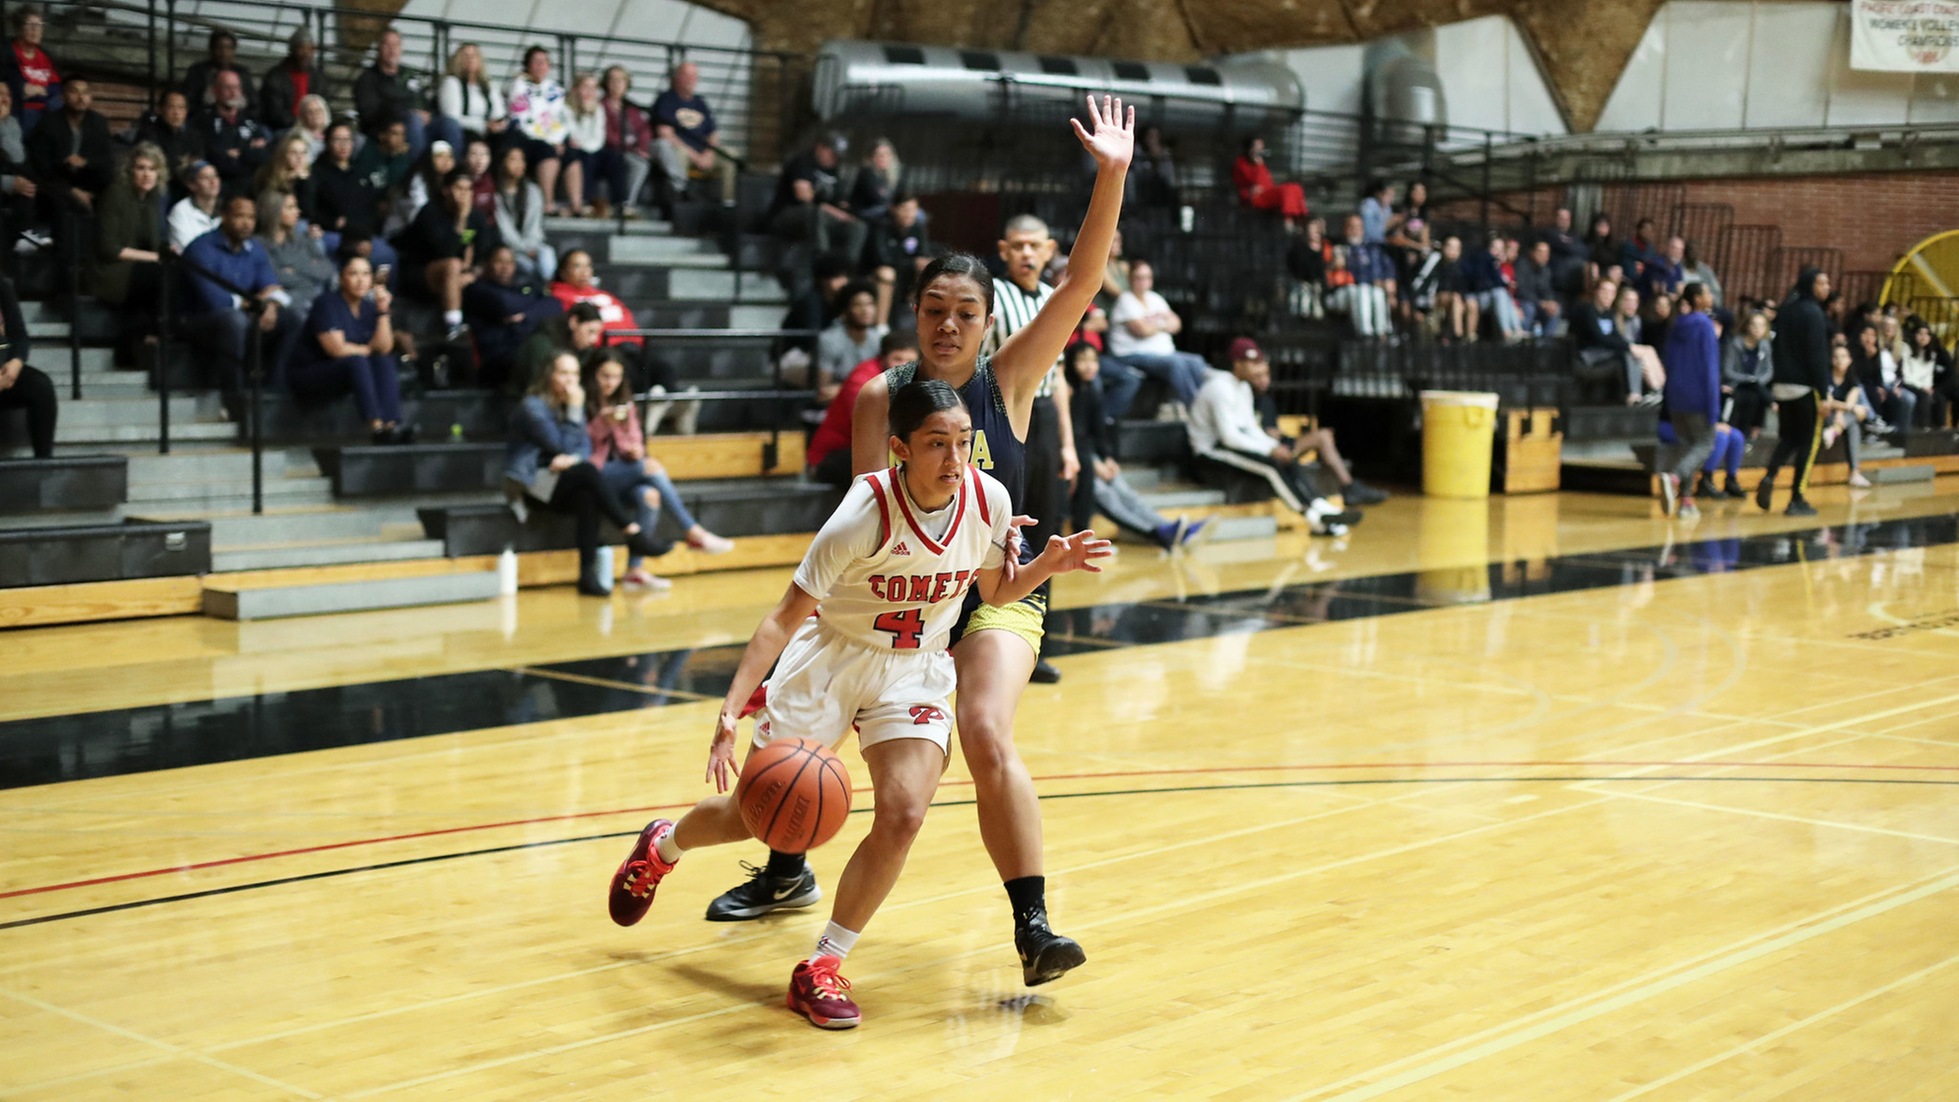 Elexis Espina shot 80 percent at the 3-point line against the Knights. Photo by Hugh Cox (taken 1/24).